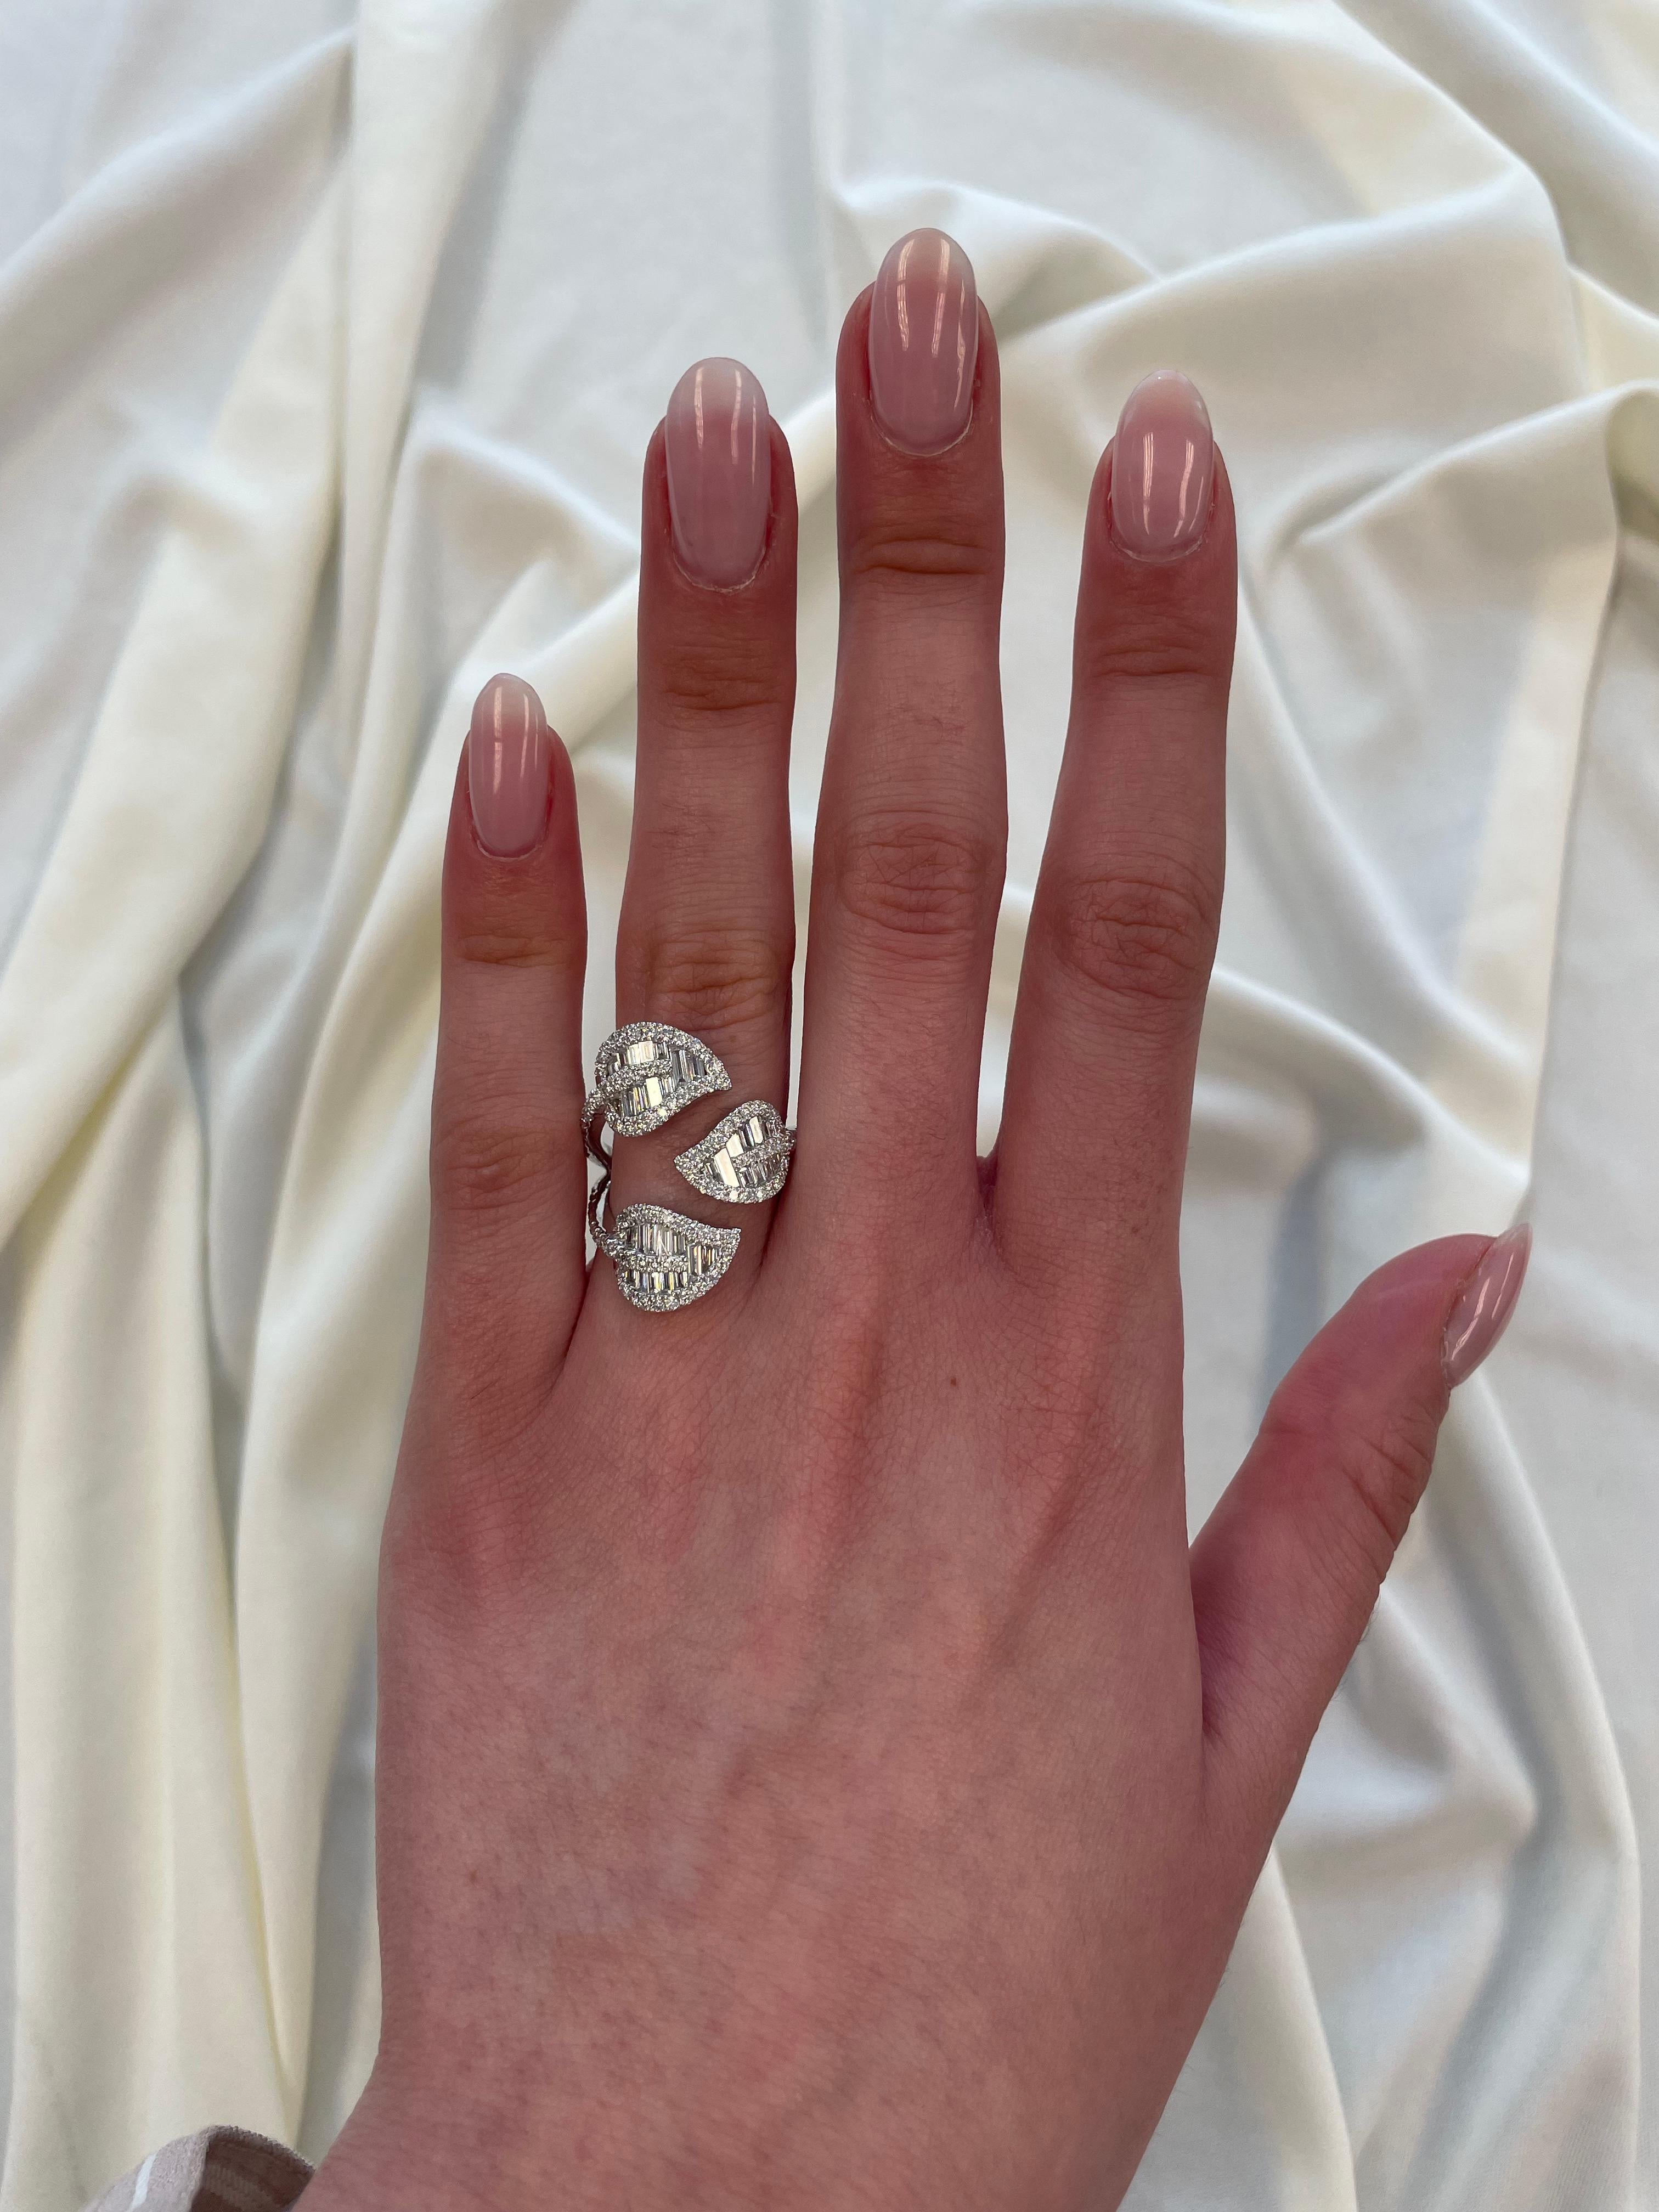 Stunning modern leaf motif bypass ring, by Alexander Beverly Hills.
141 round and baguette cut diamonds, 1.88 carats. Approximately G/H color grade and VS clarity grade. 18-karat white gold, 7.61 grams, current ring size 7.
Accommodated with an